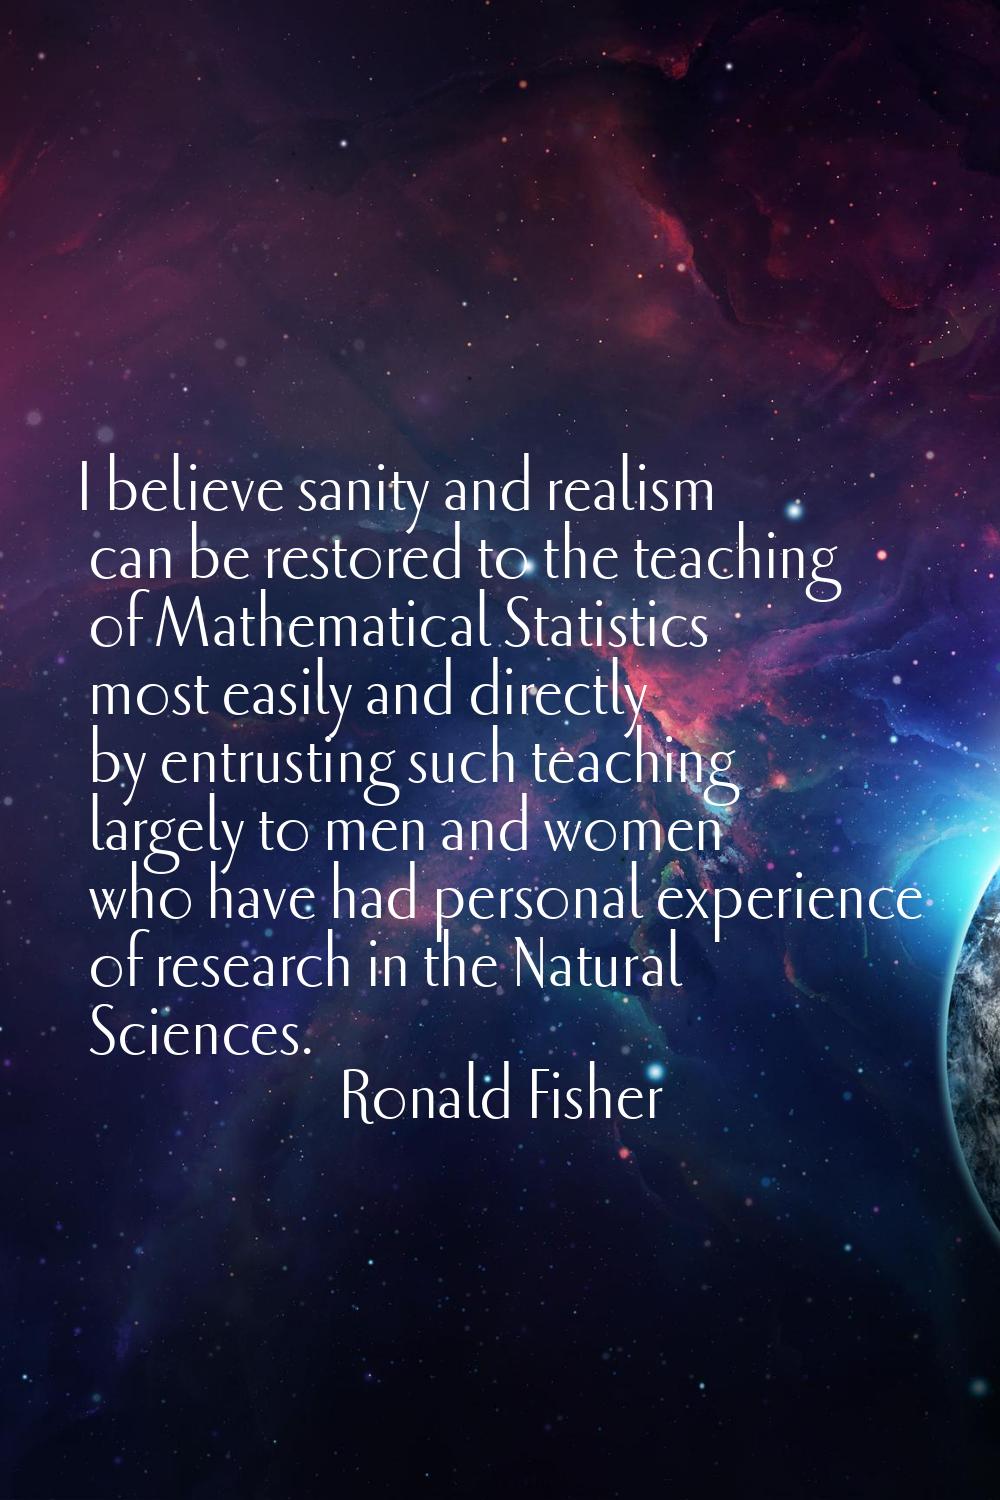 I believe sanity and realism can be restored to the teaching of Mathematical Statistics most easily